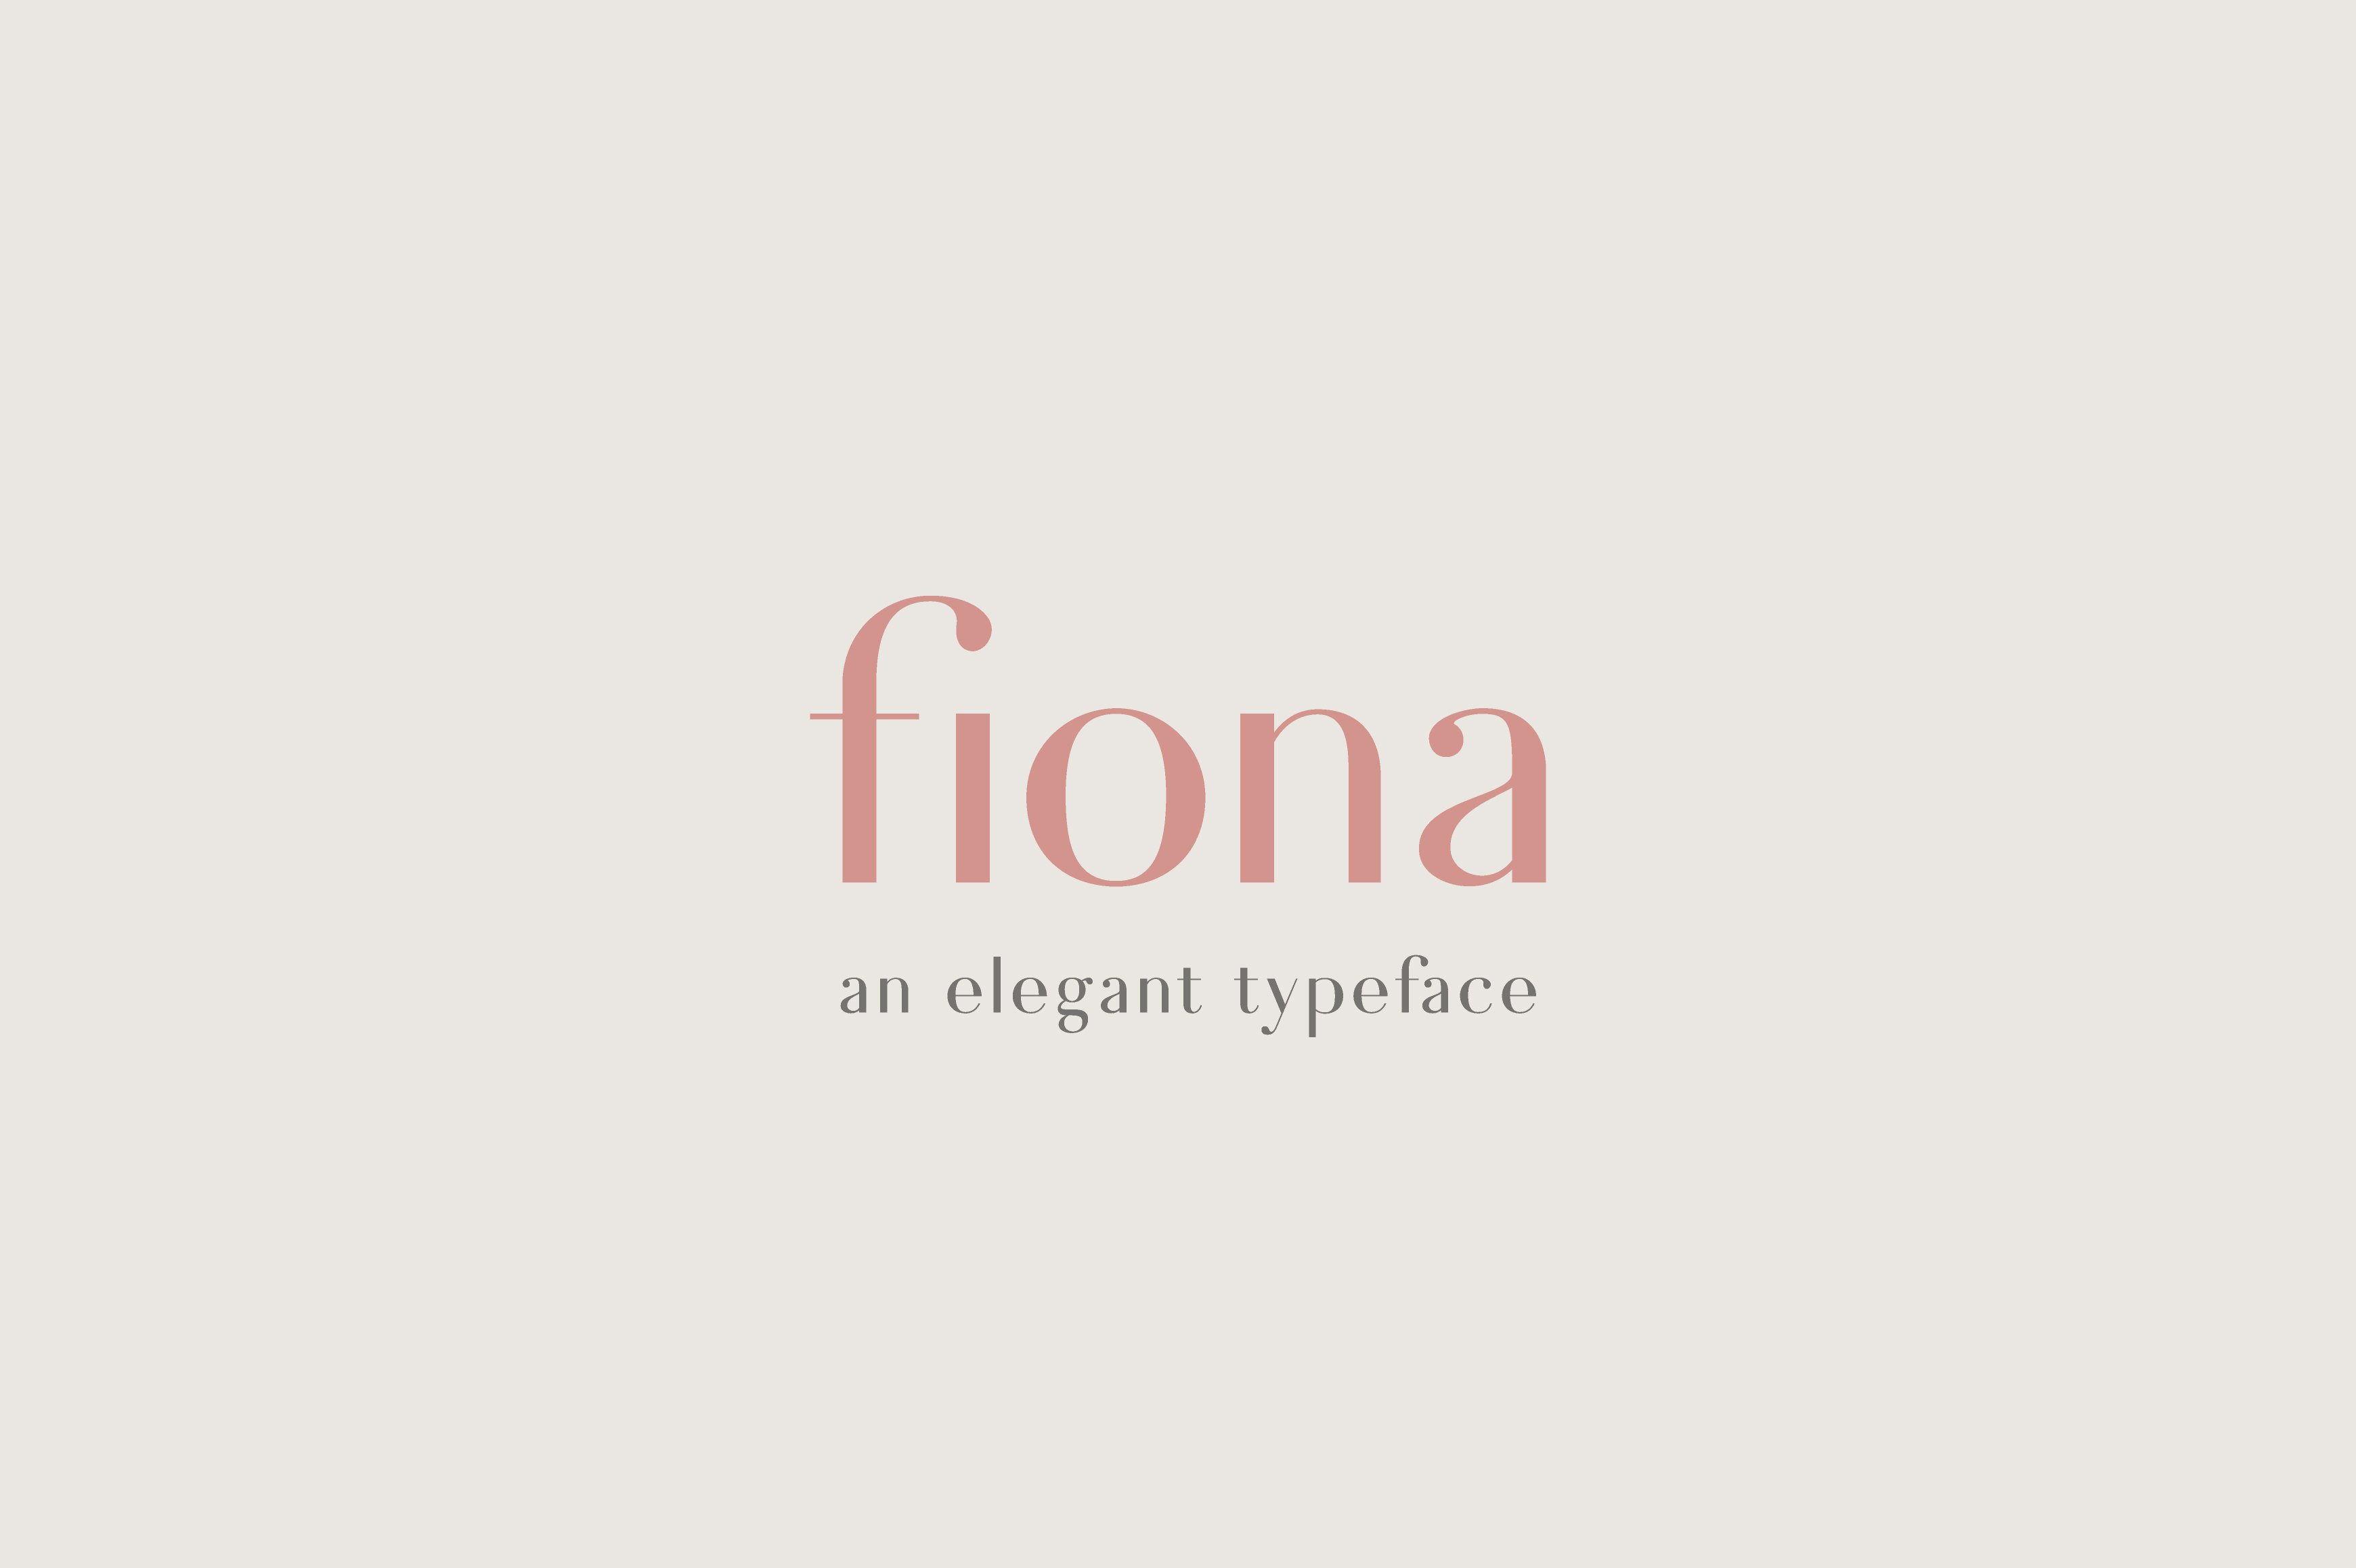 Fiona - An Elegant Typeface cover image.